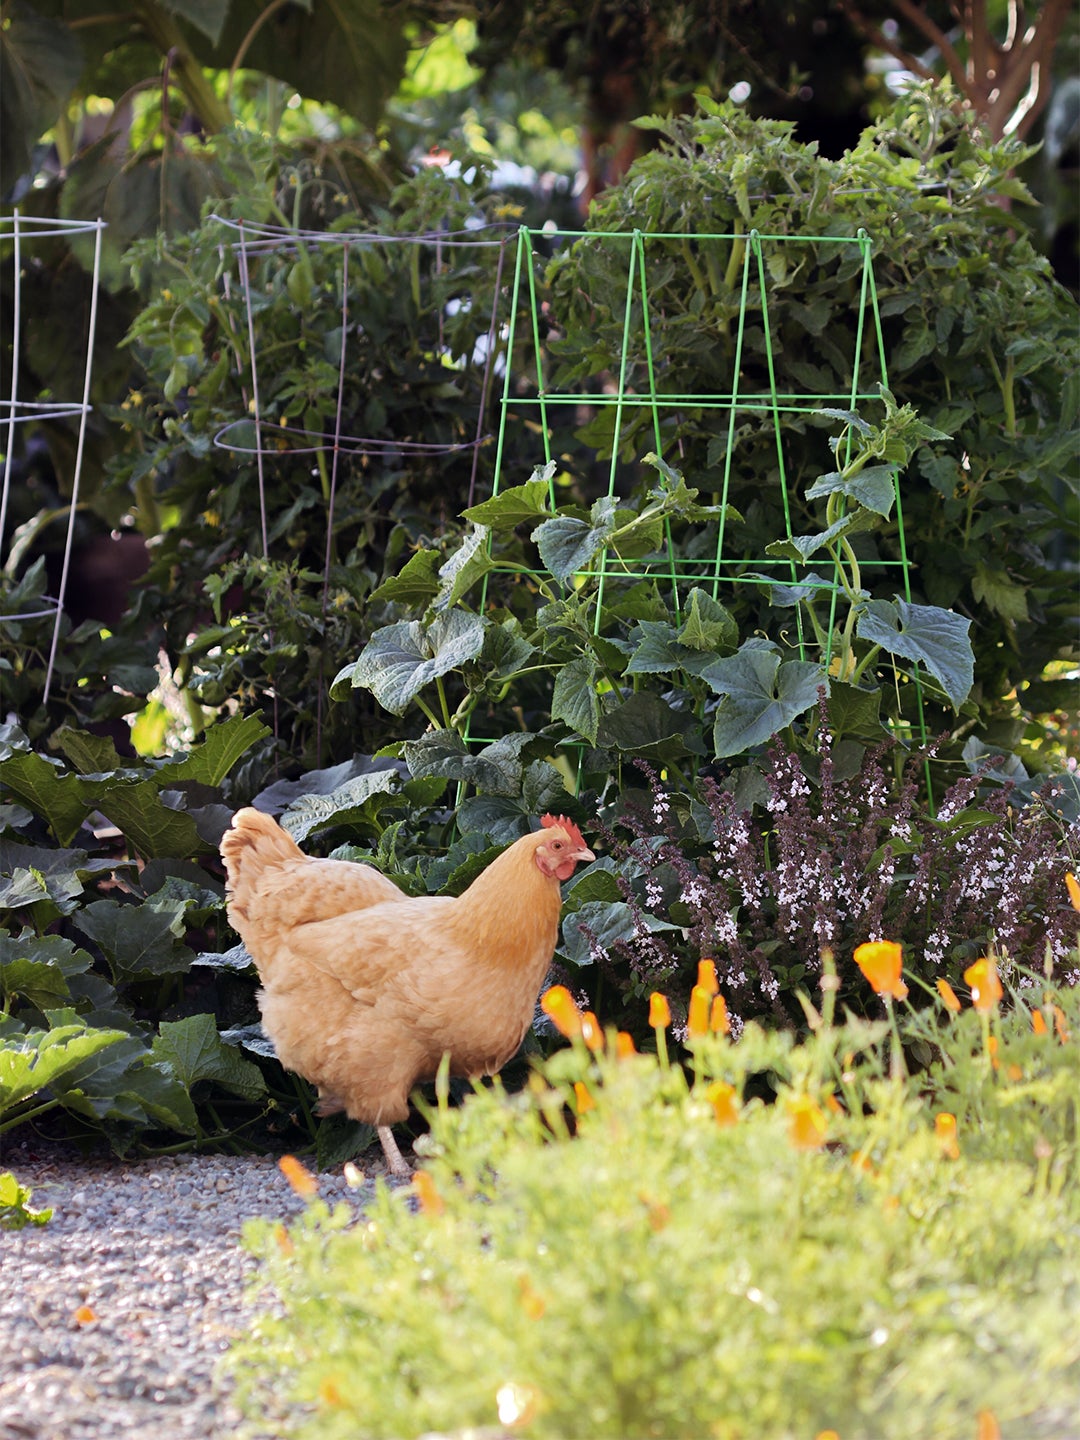 Soaring Sunflowers and a Fast-Growing Pumpkin Patch Turned This Front Yard Into a Destination